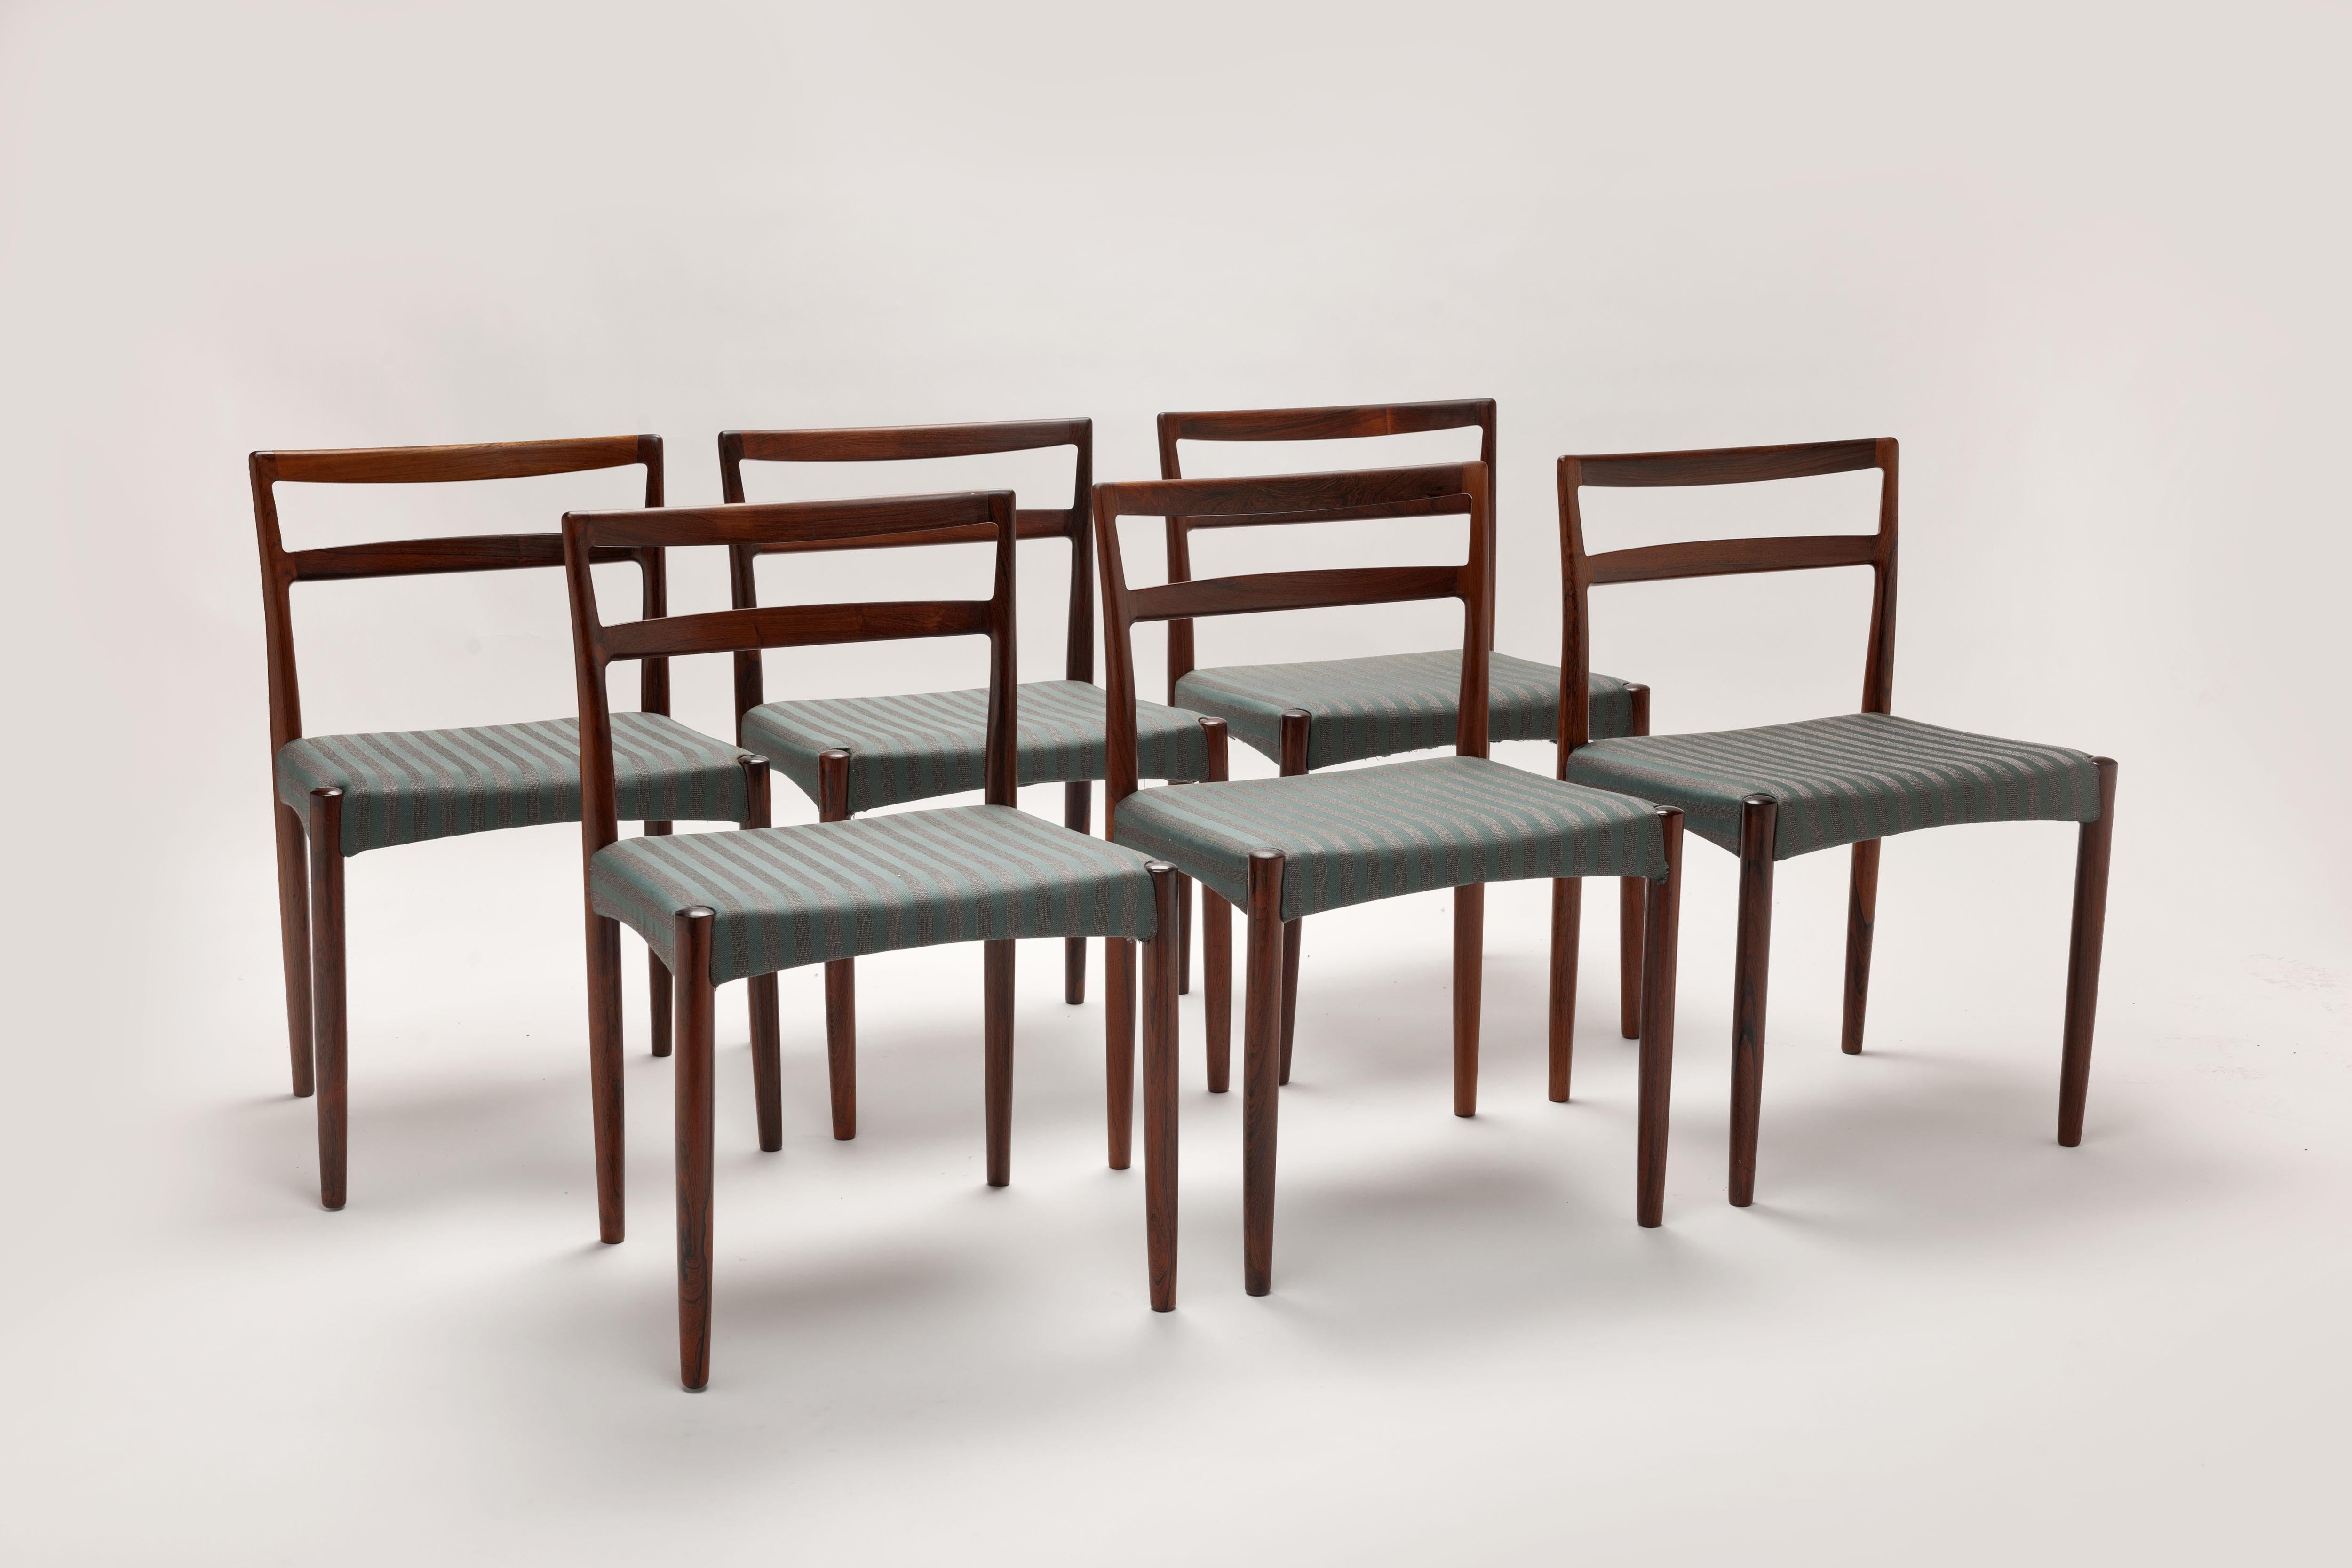 Set of six solid rosewood dining chairs designed in 1961 by Danish designer Harry Østergaard. Made in Denmark by Randers Møbelfabrik in the 1960s with beautiful joint detailing at rear legs. 
Timeless design in beautiful high quality Rosewood